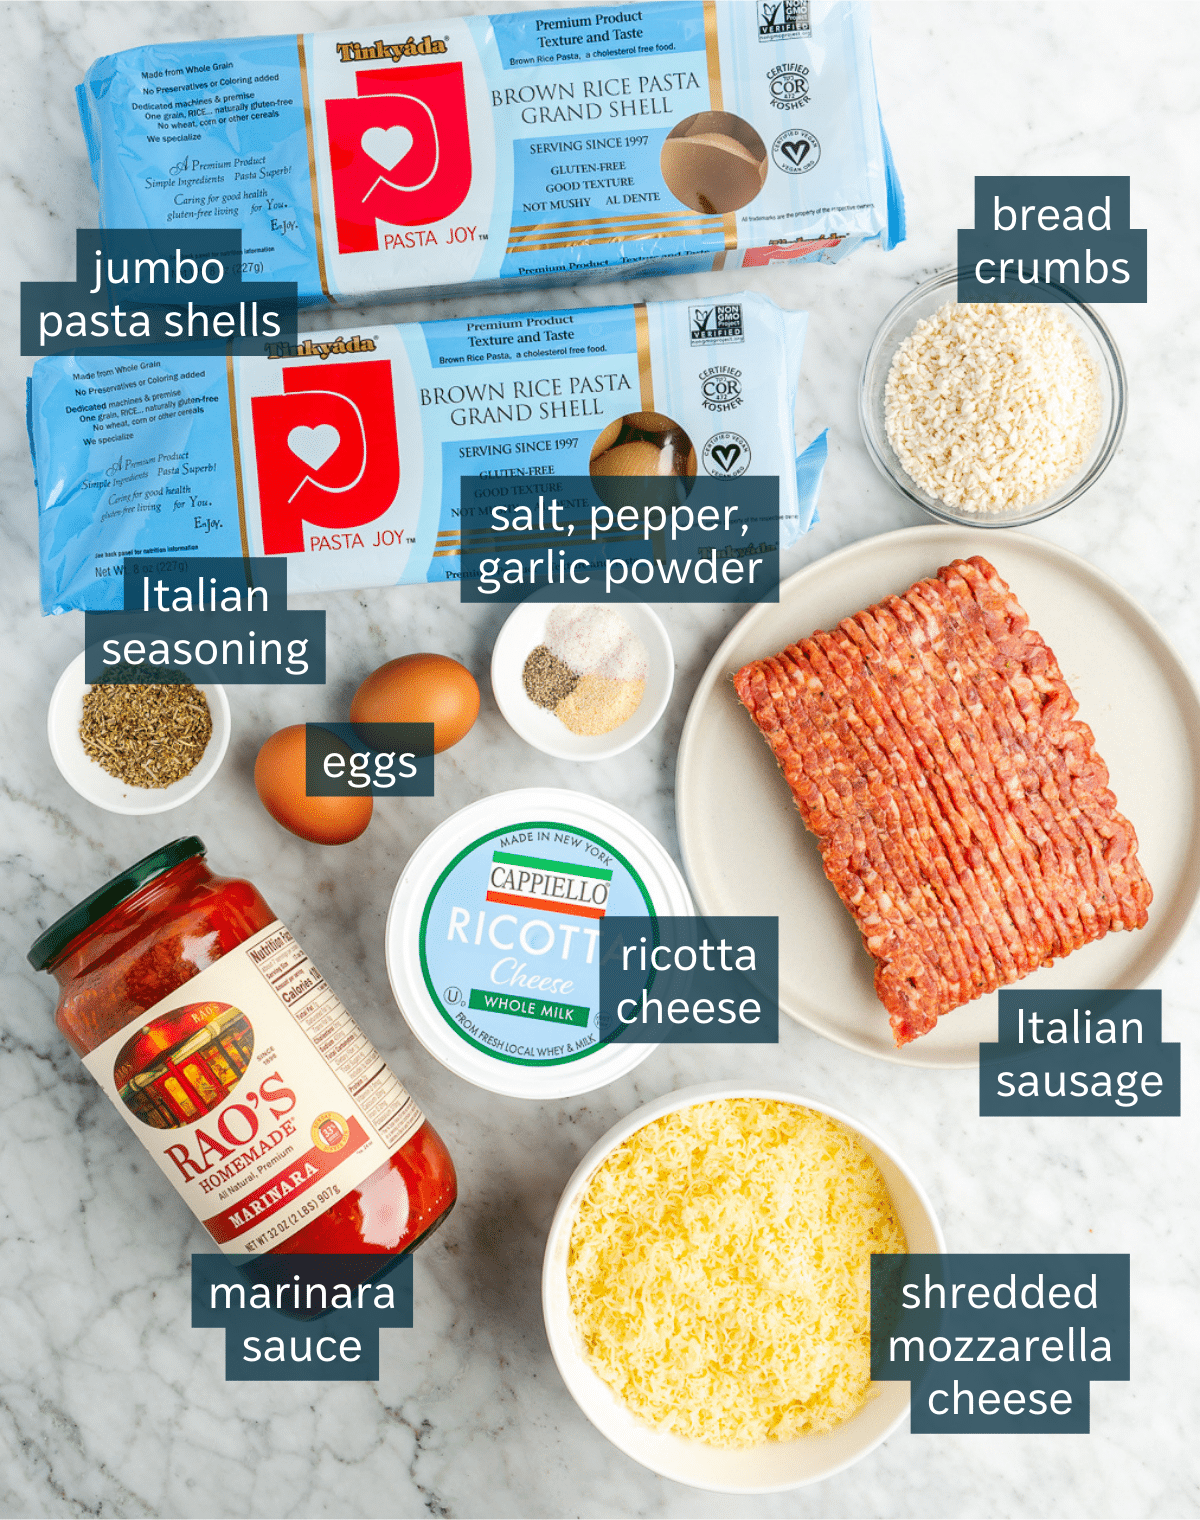 All of the ingredients needed for stuffed pasta shells on a marble surface.